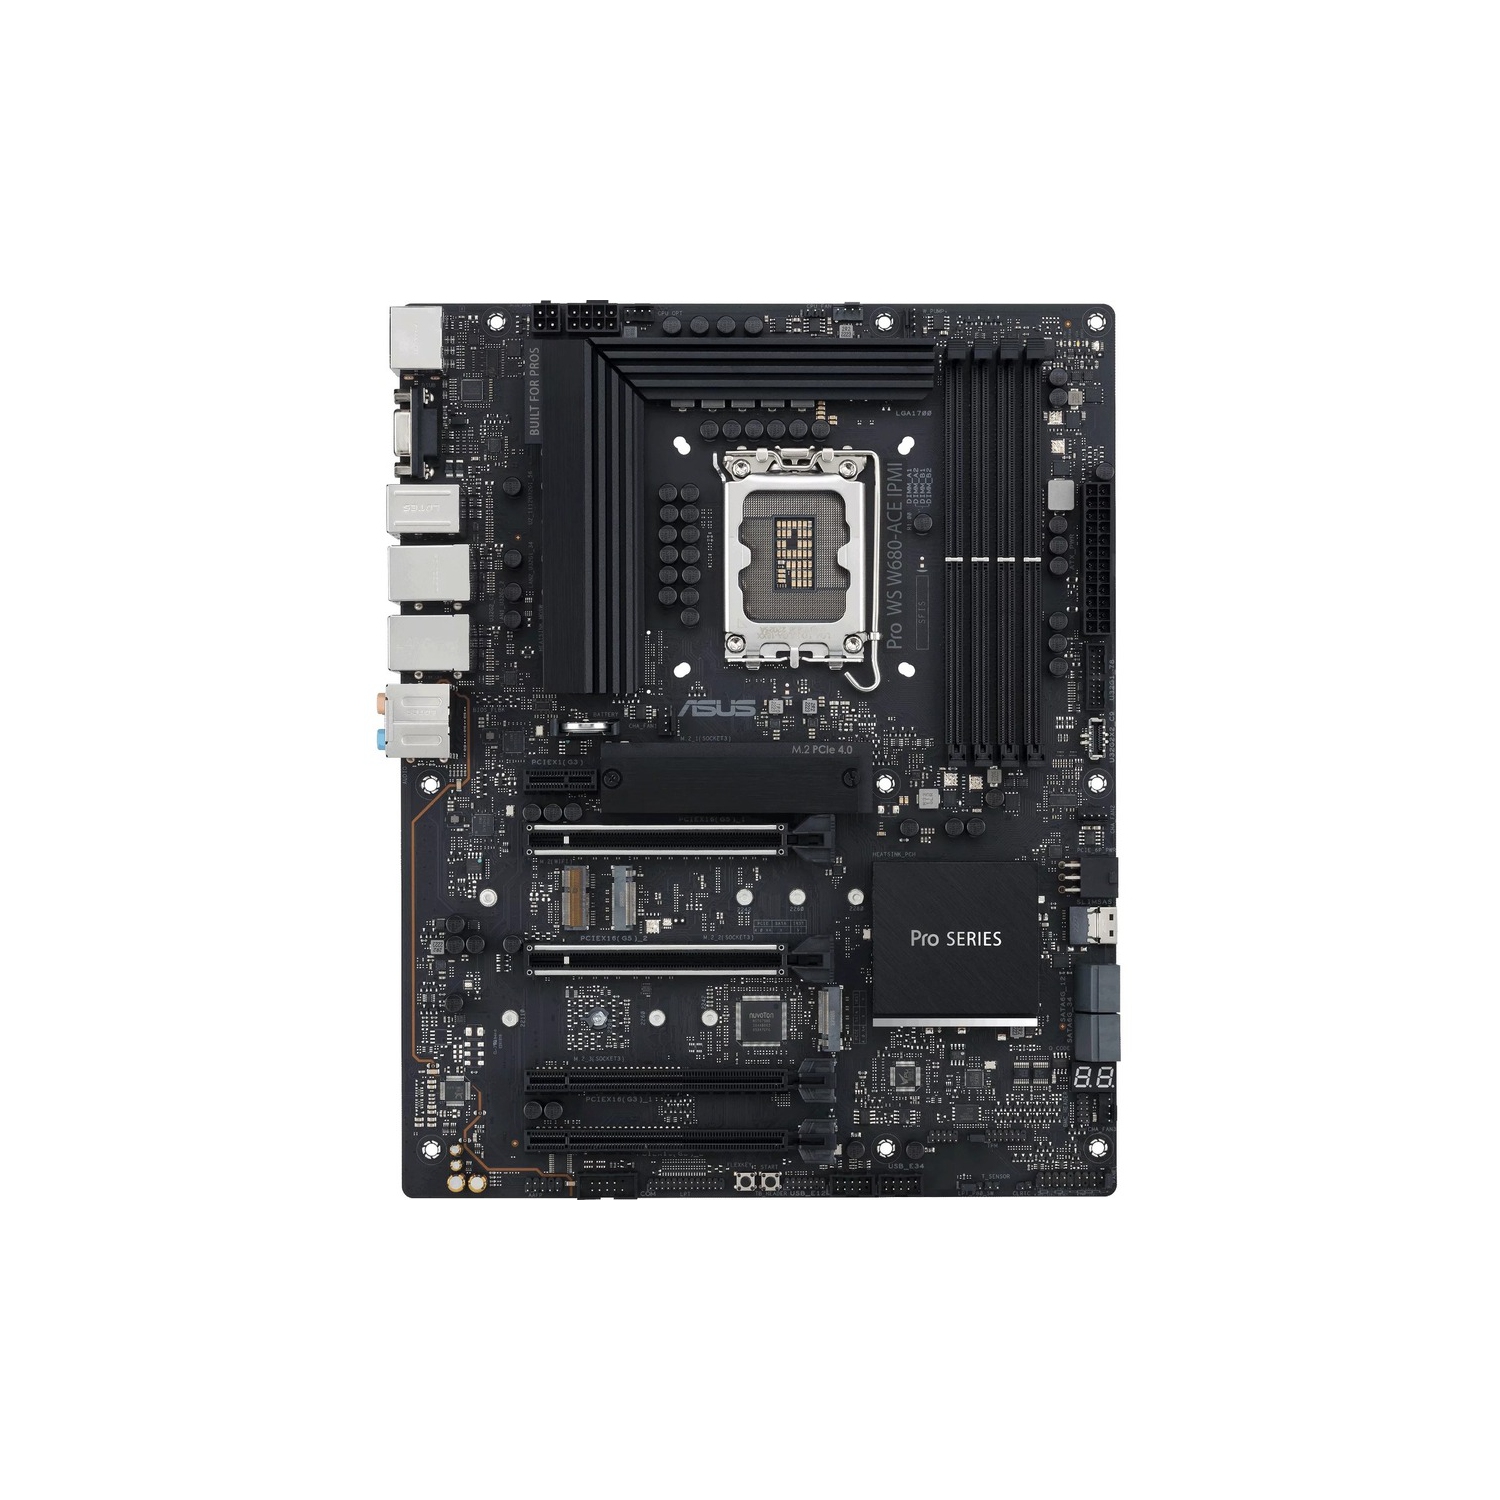 Asus Pro WS W680-ACE IPMI Workstation Motherboard PRO WS W680-ACE IPMI